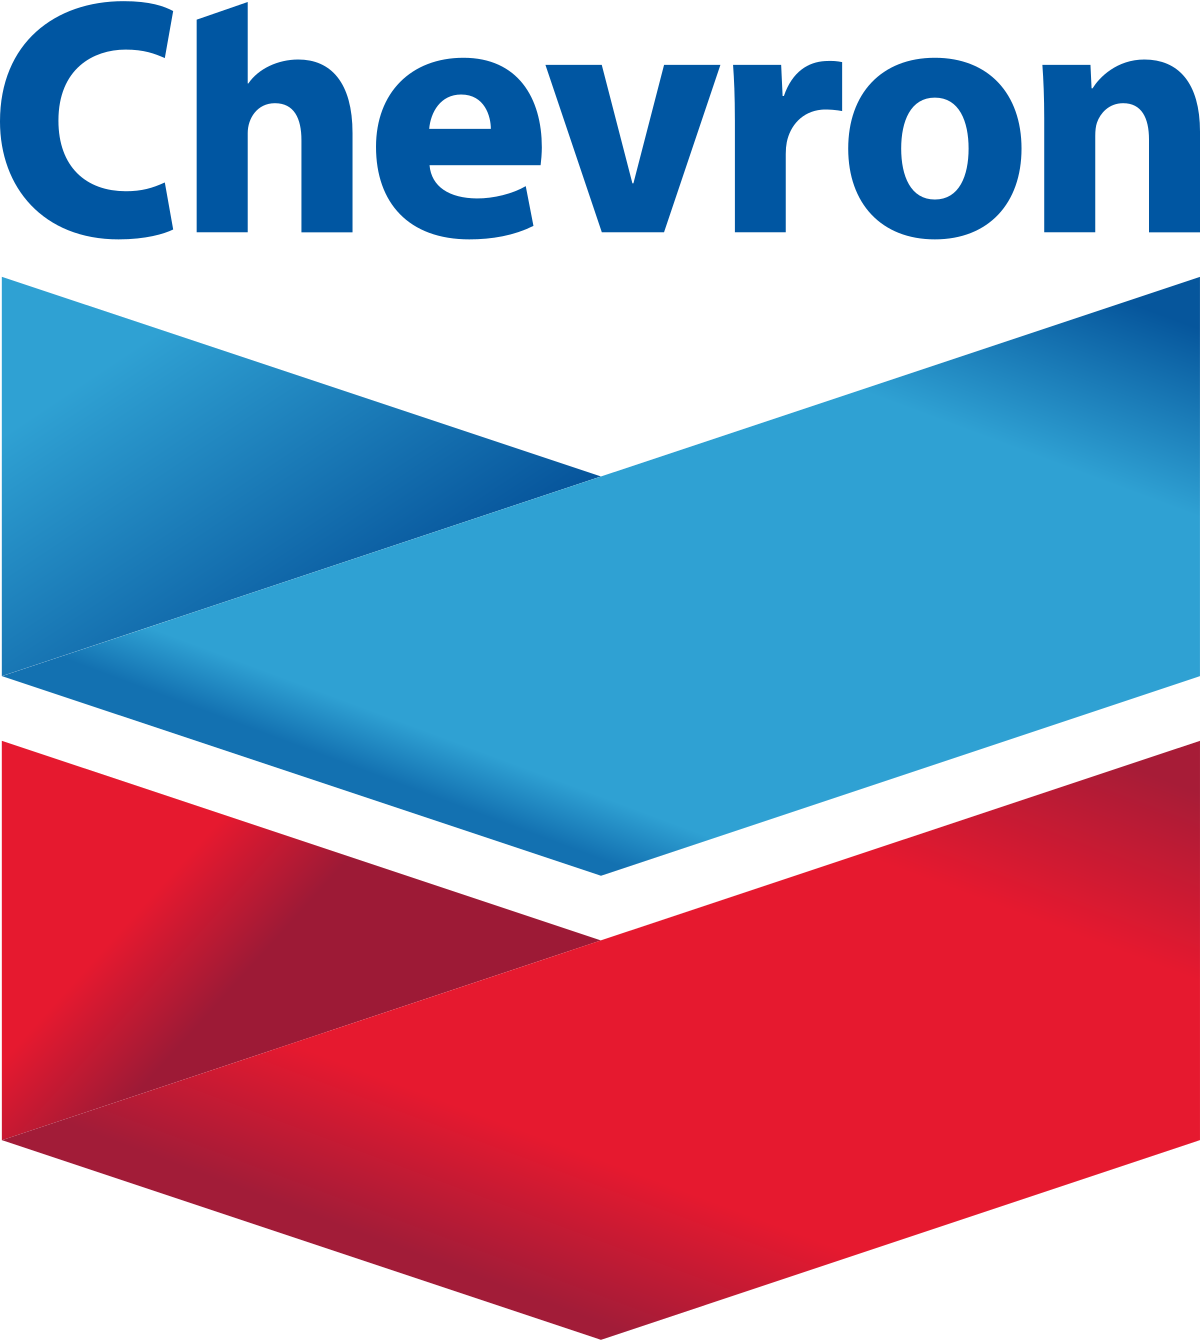 Chevron can resume key role in Venezuela's oil output, exports